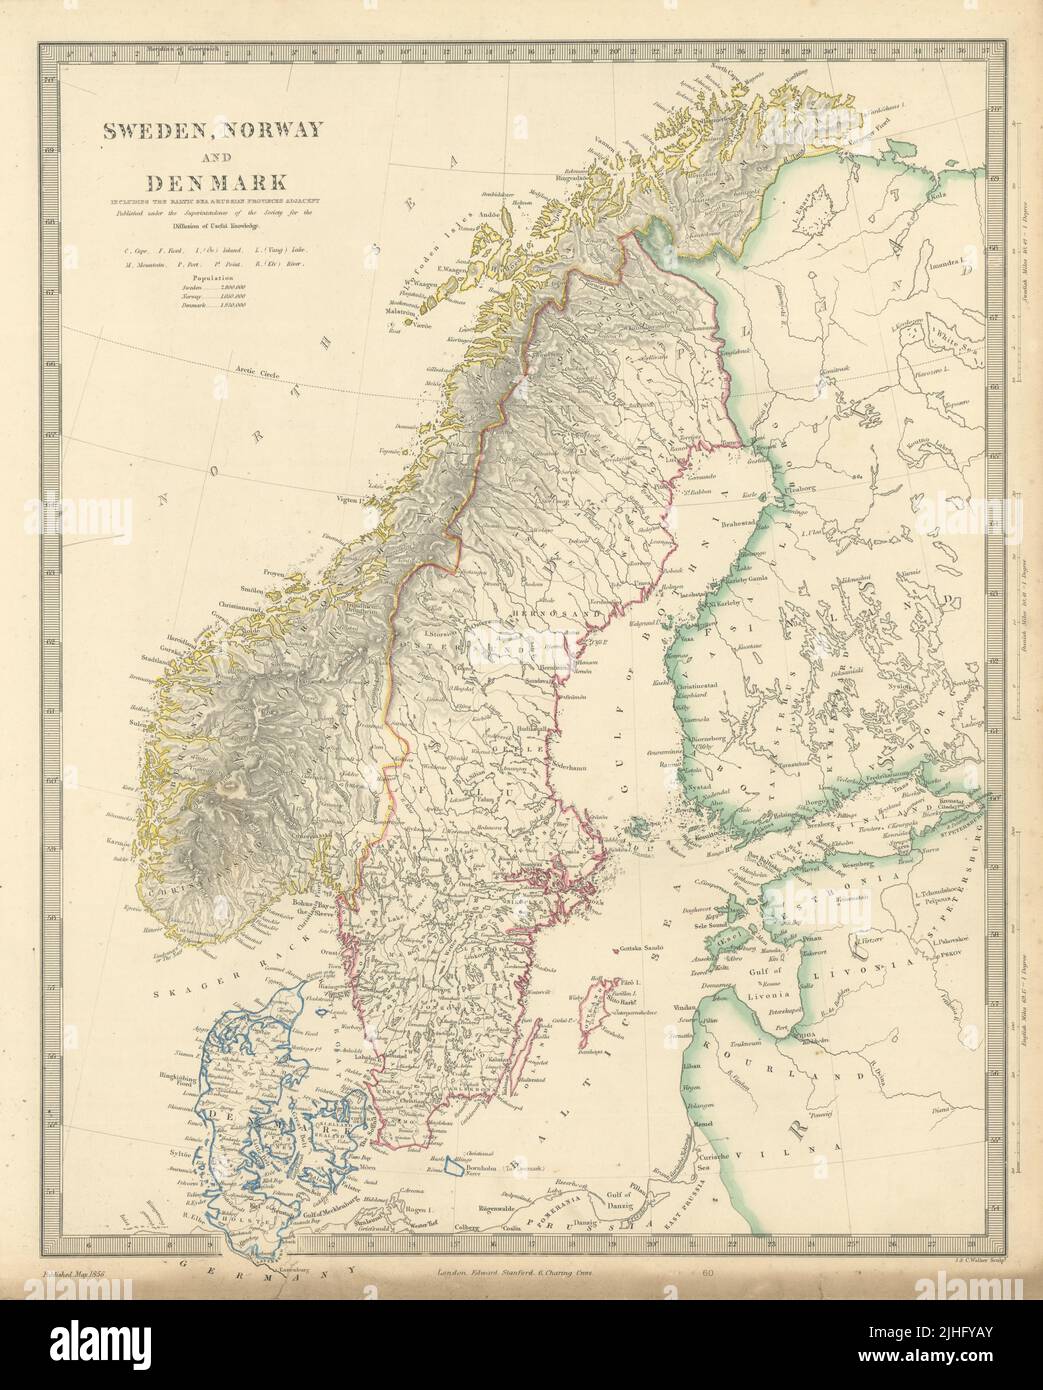 SCANDINAVIA. Sweden, Norway, and Denmark. Population table. SDUK 1856 old map Stock Photo